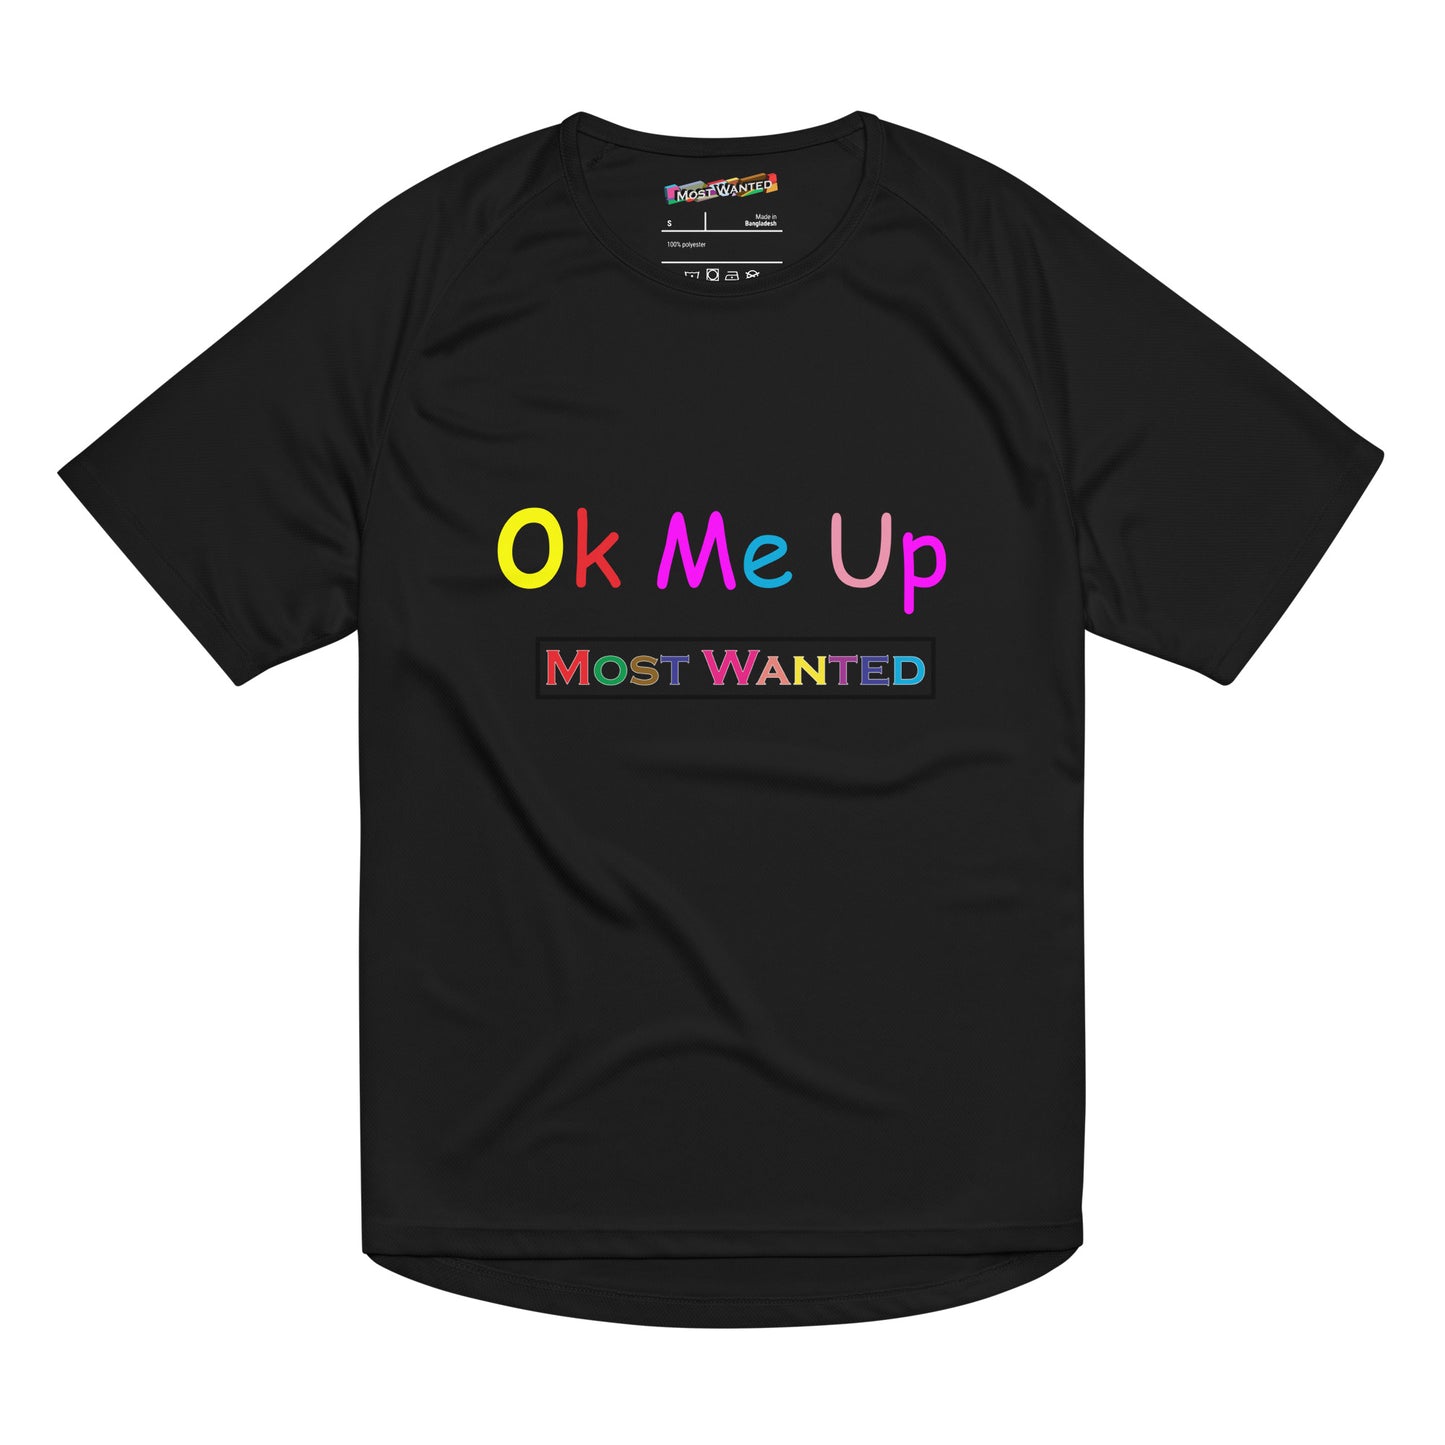 Ok Me Up (Most Wanted) Unisex sports Tee jersey